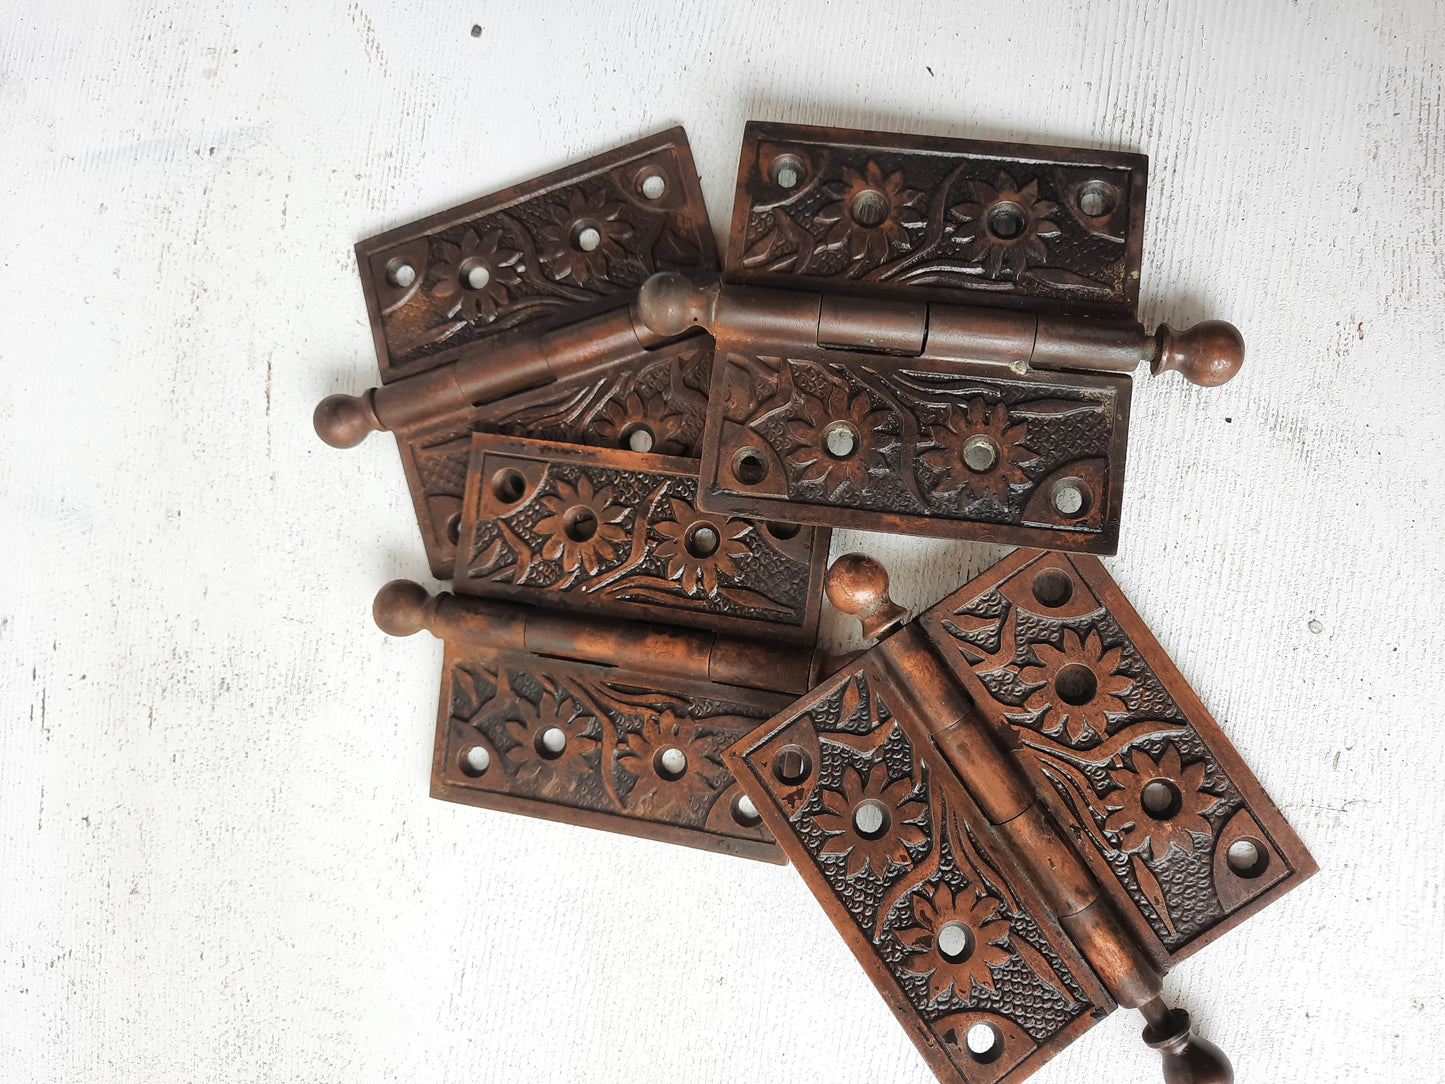 Two Ornate 4x4 Antique Hinges, Victorian Iron Ornate Pattern Door Hinges